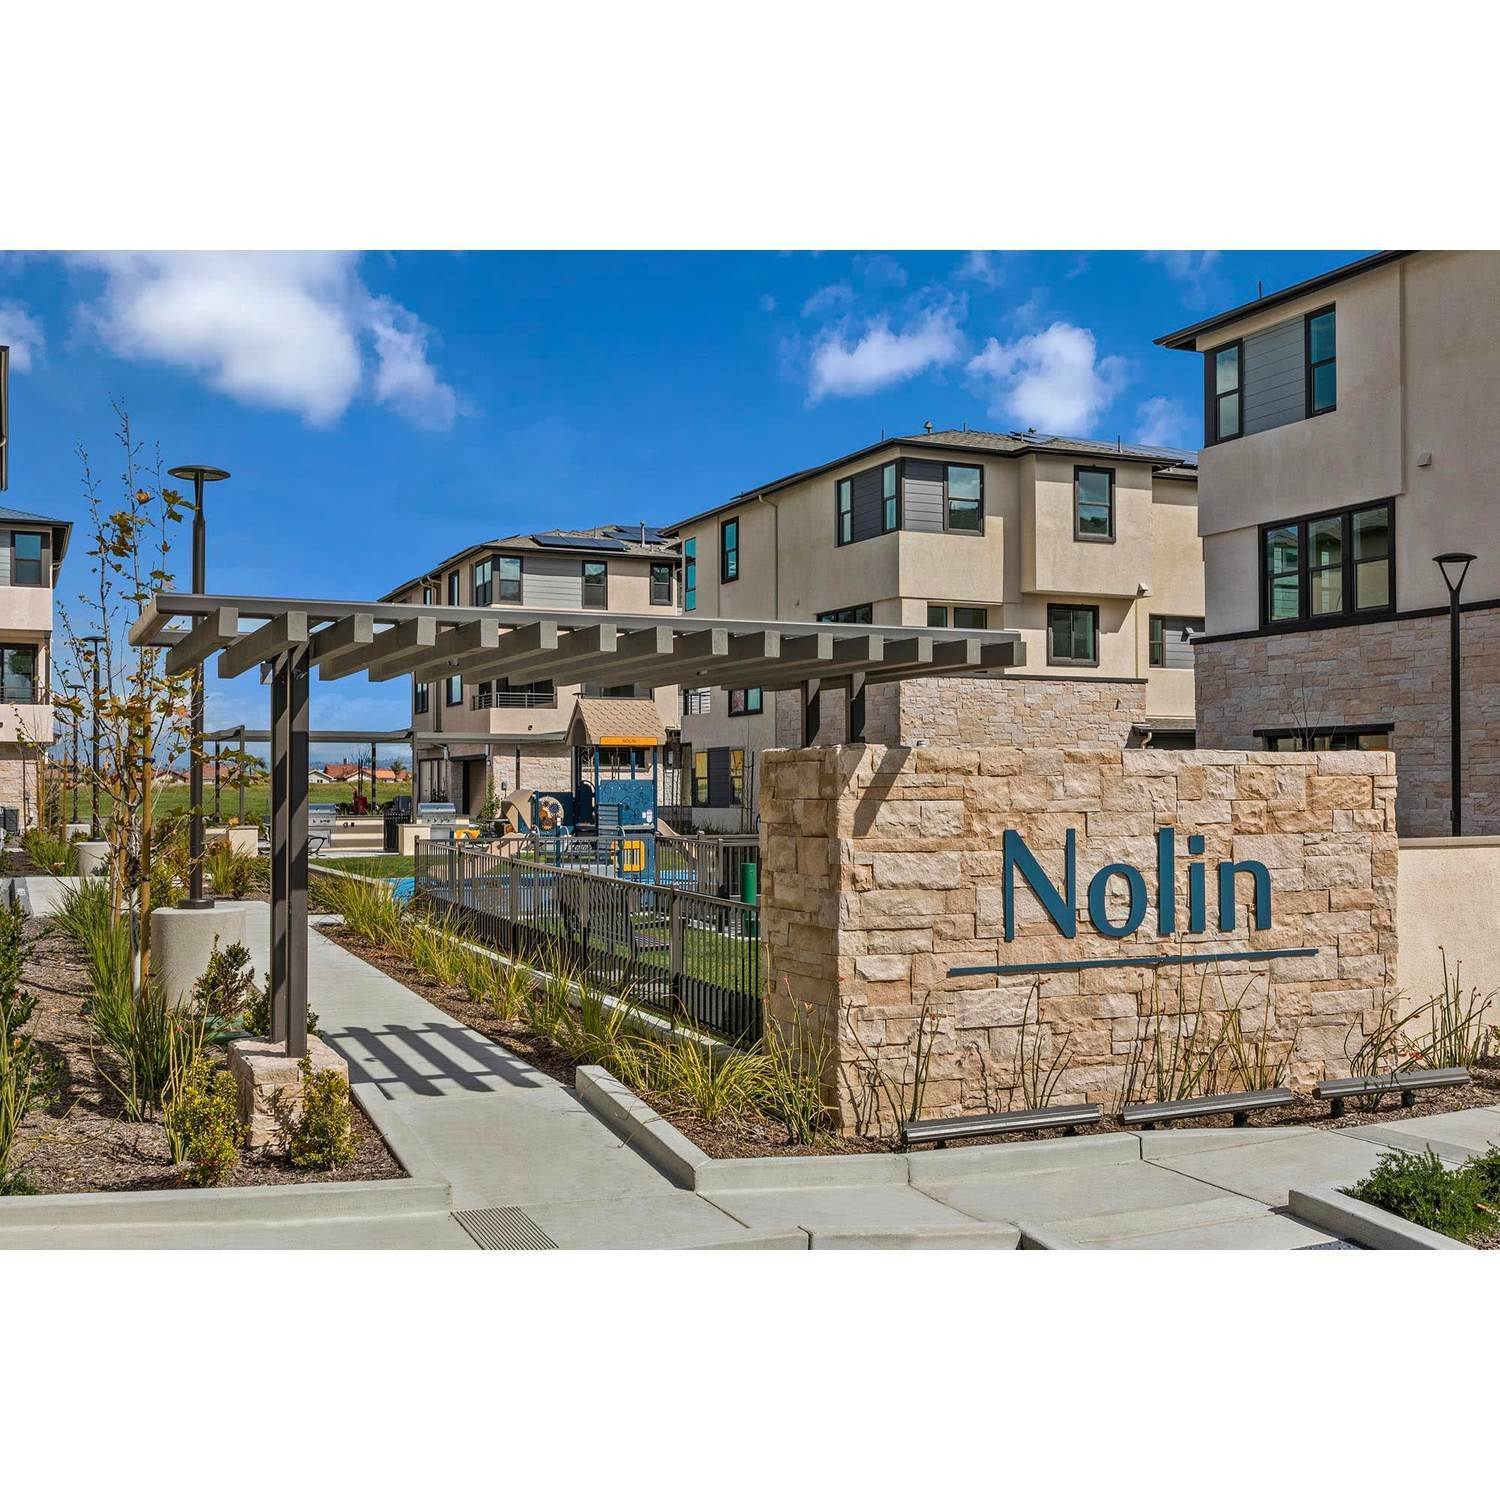 Townhouse for Sale at Nolin 2941 W. Lincoln Avenue, Anaheim, CA 92801